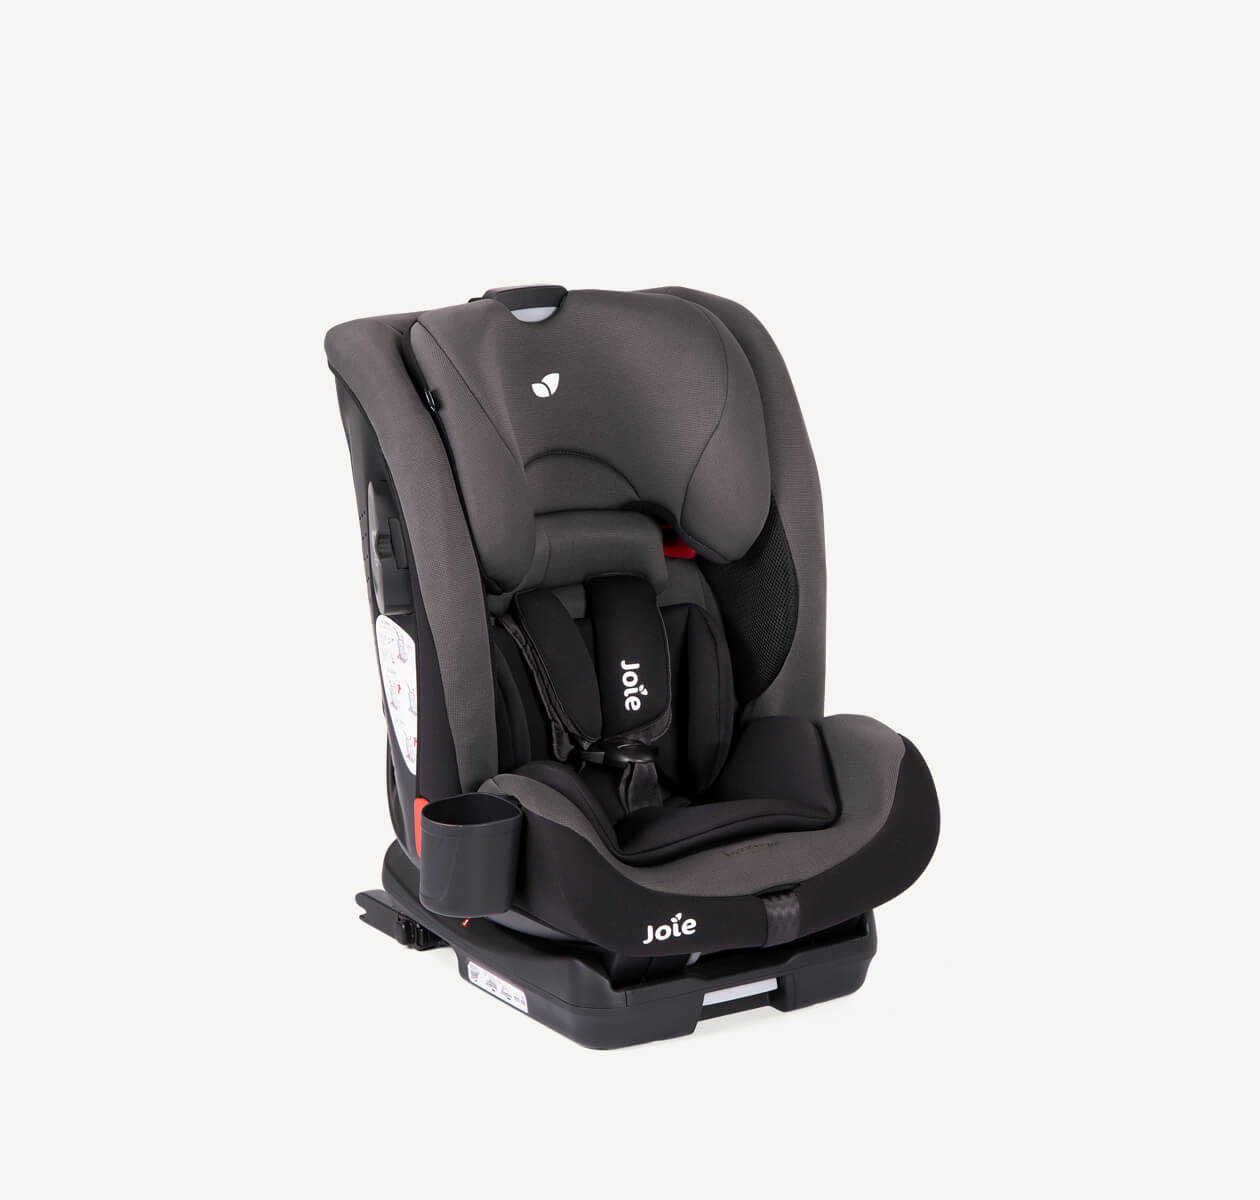 bold™ R – Baby Gear That Goes Above & Beyond